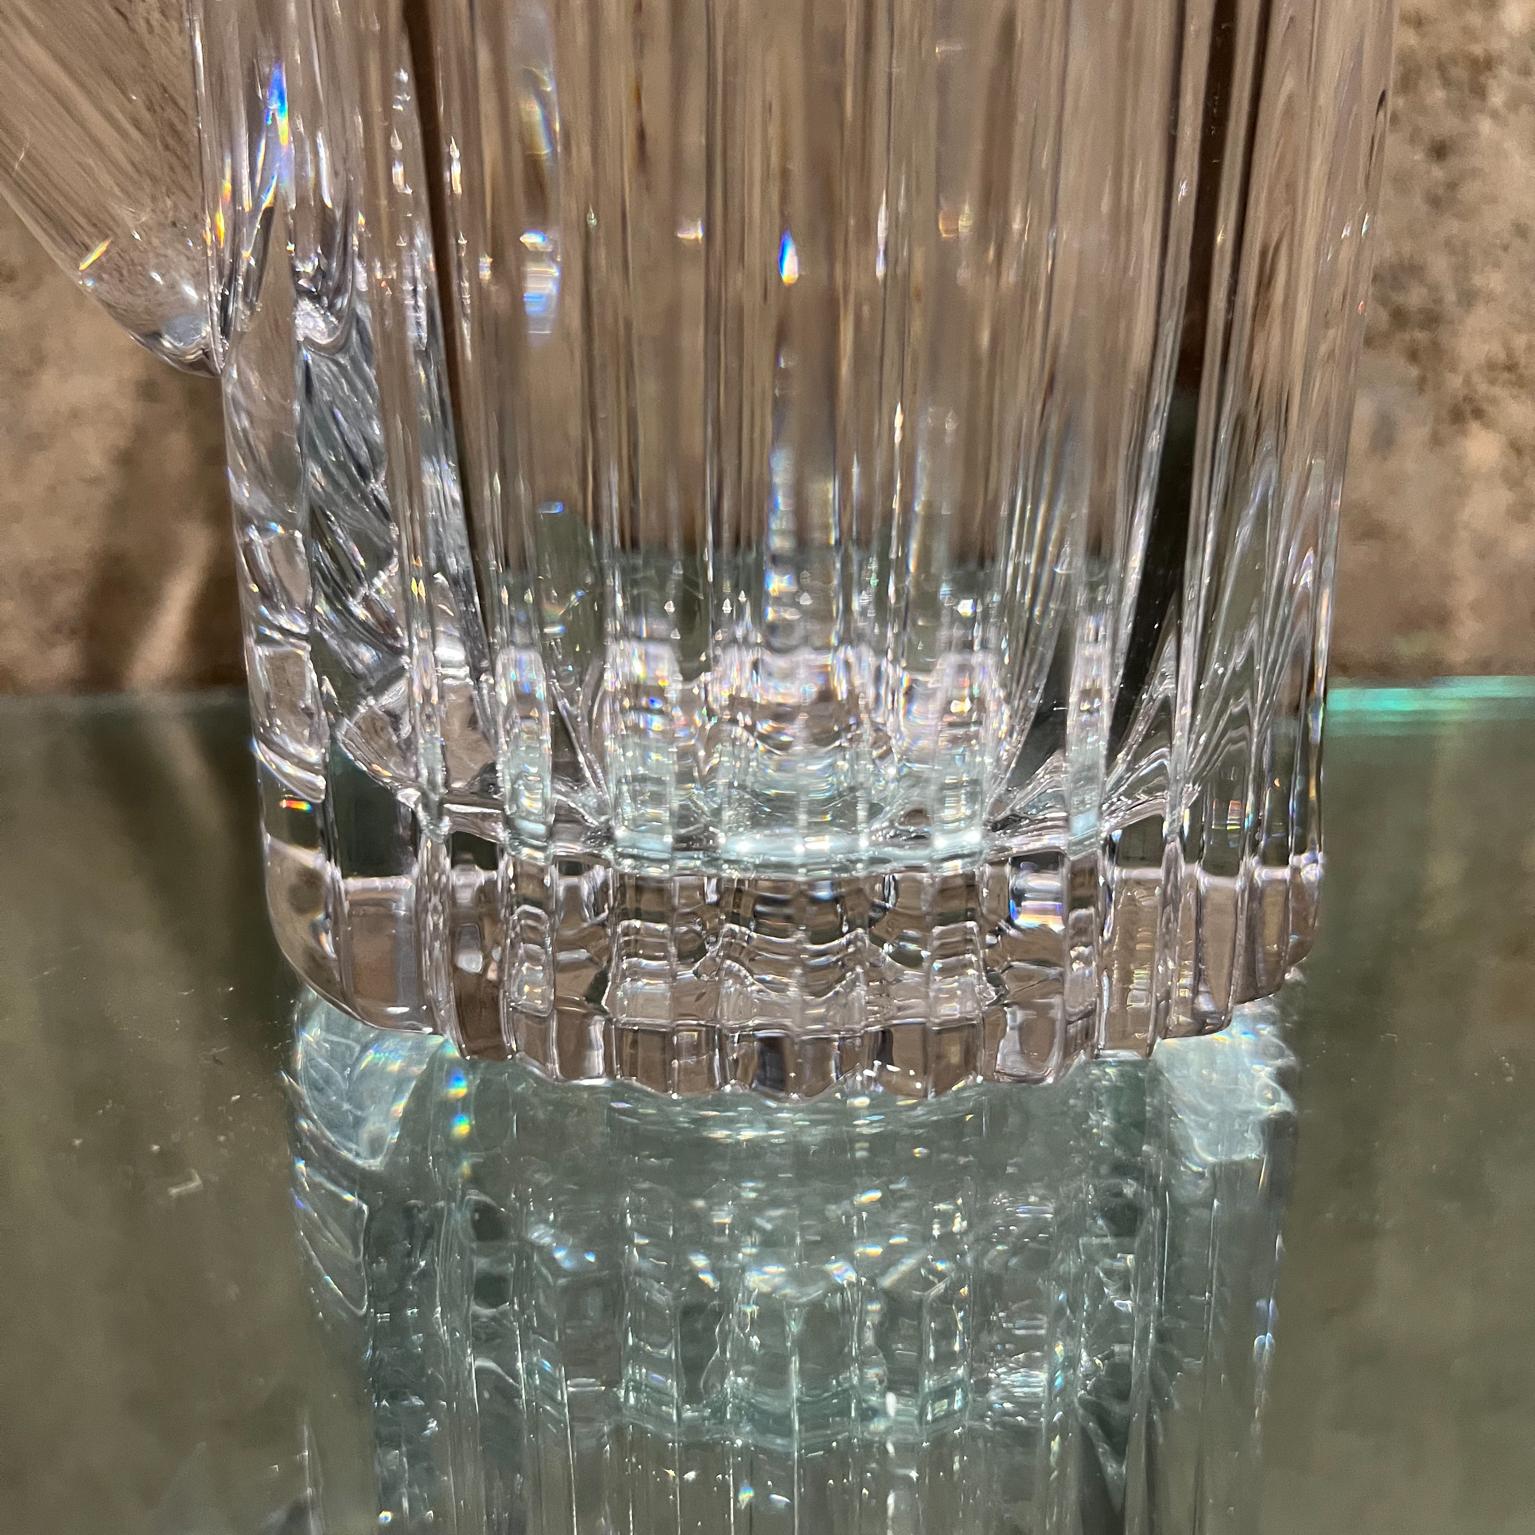 Mid 20th Century Sculptural Modern Cut Glass Crystal Pitcher In Good Condition For Sale In Chula Vista, CA